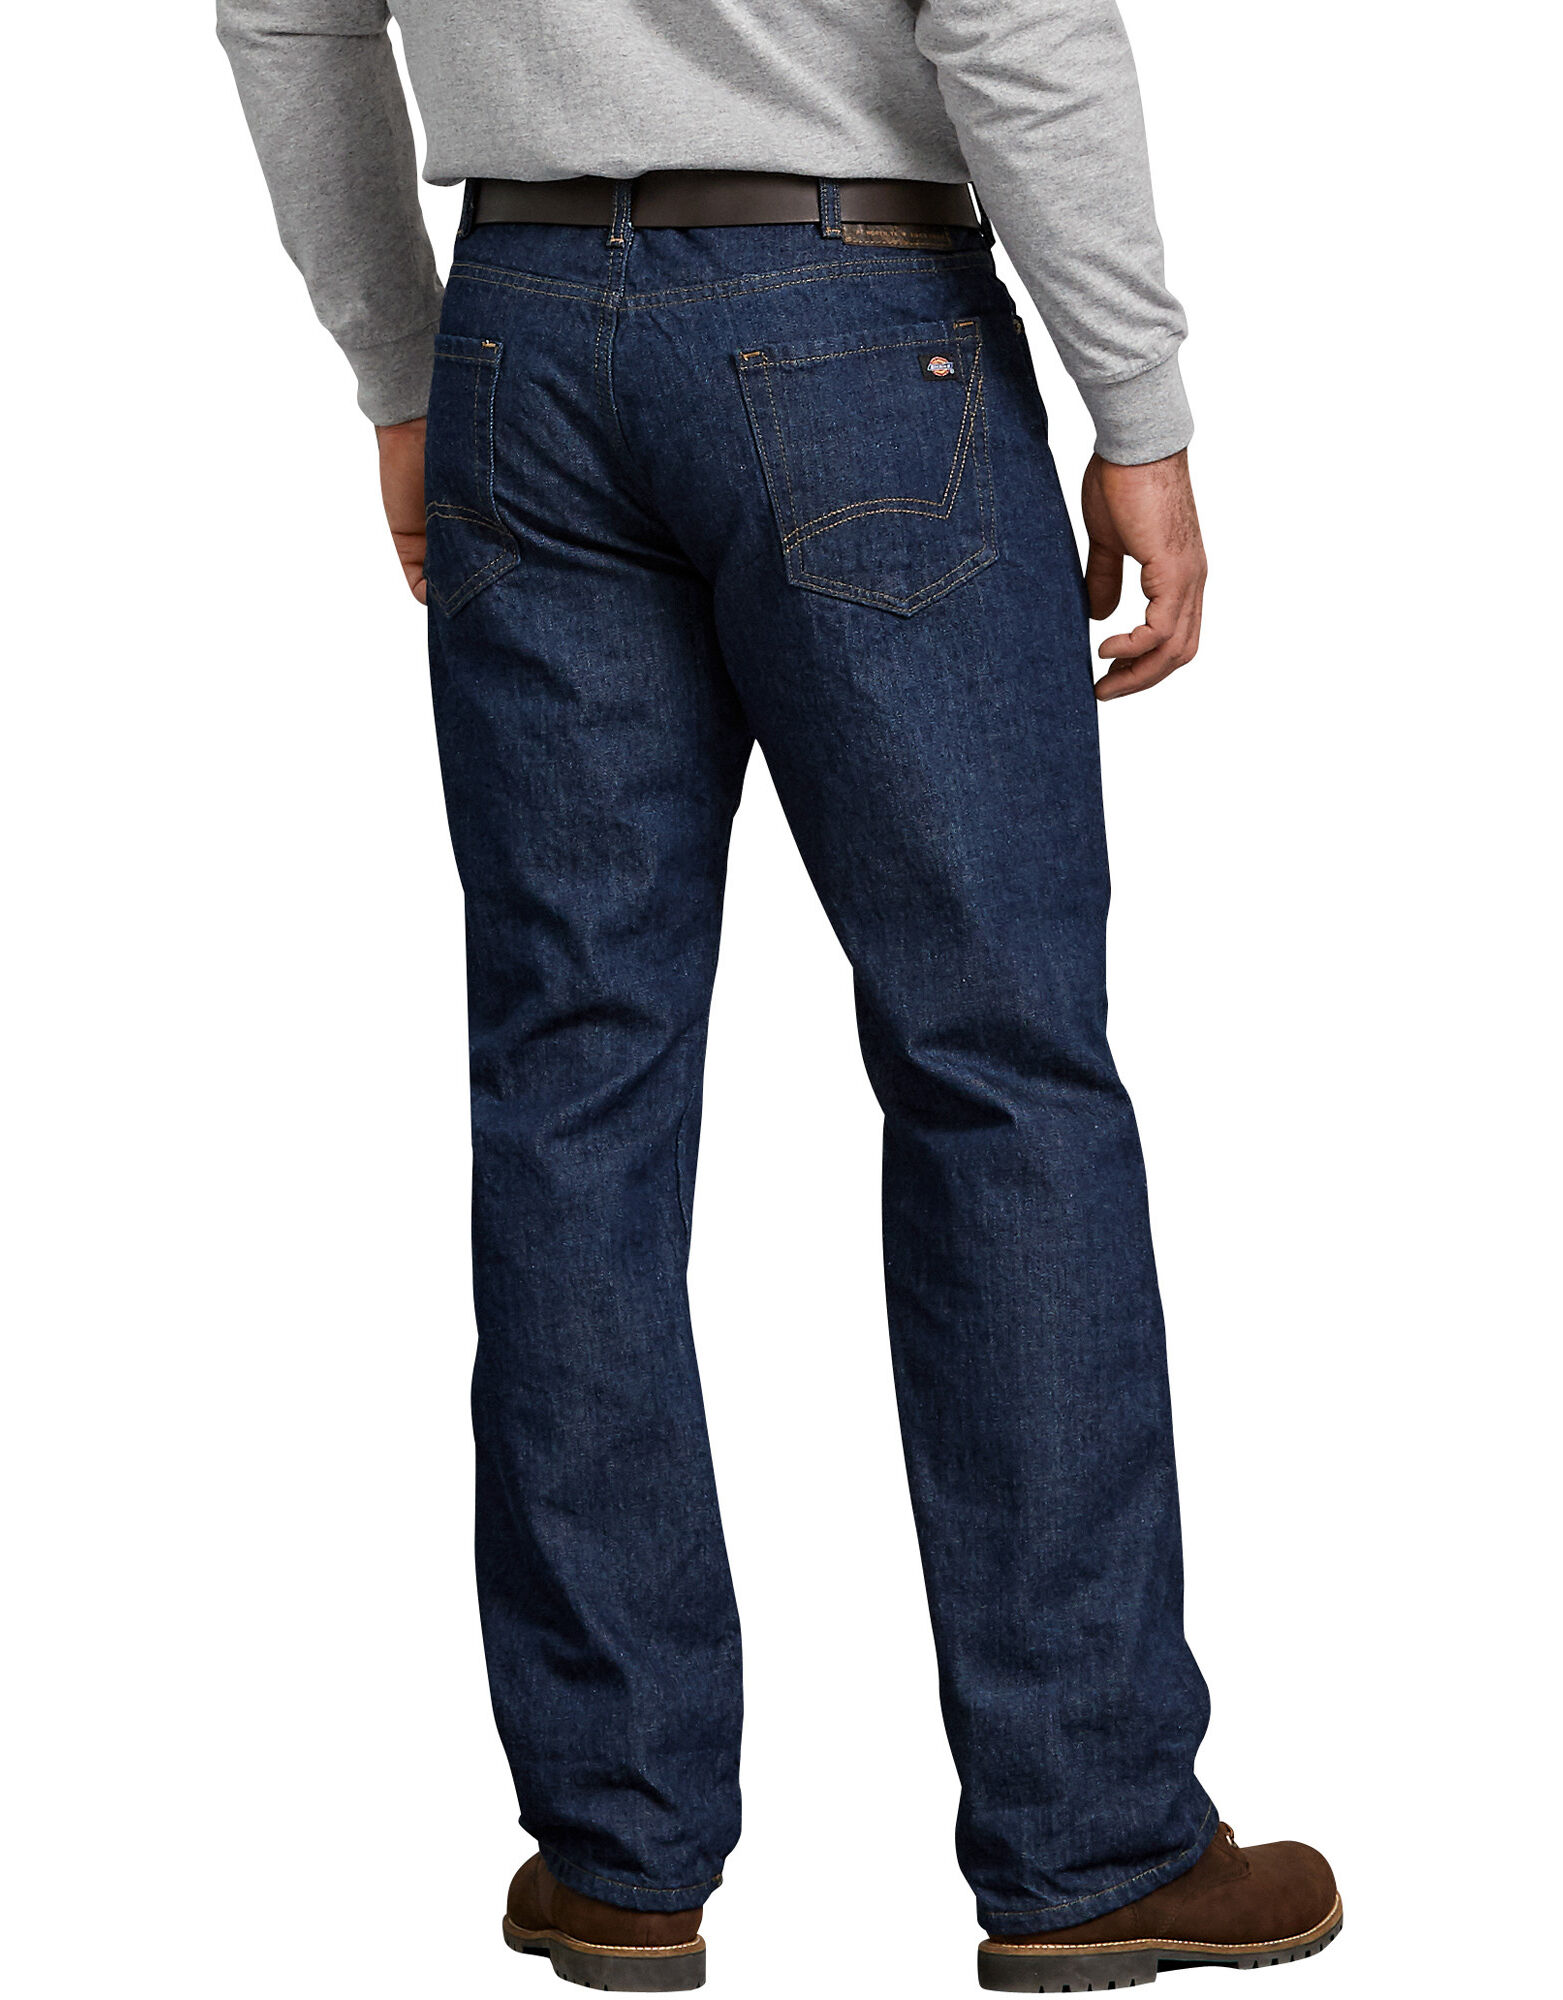 Relaxed Fit Flannel Lined Jeans for Men | Dickies